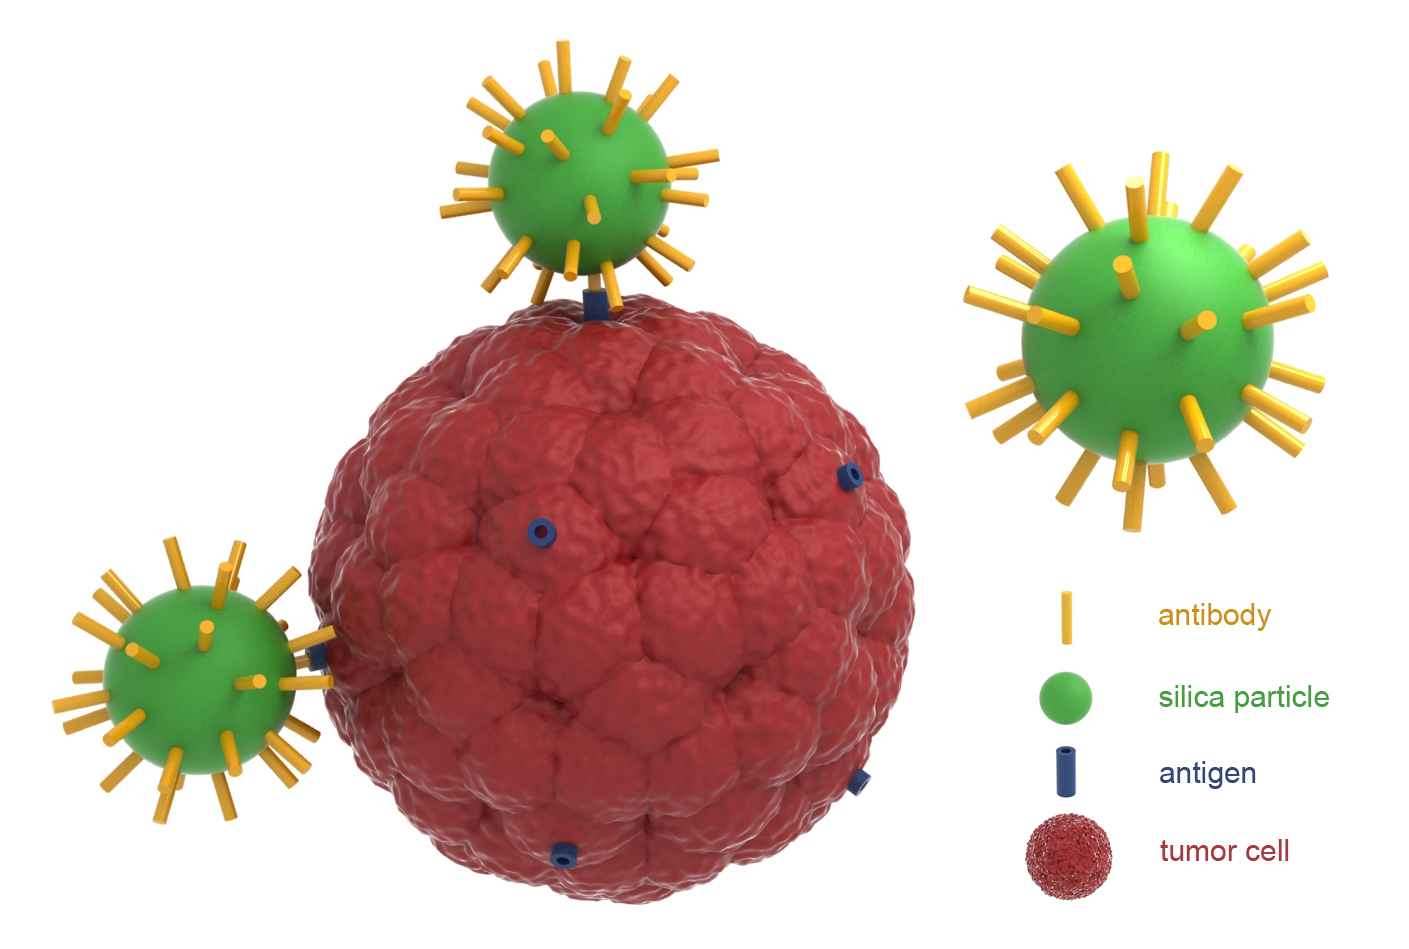 Schematic illustration of antibody modified SiO2 nanoparticles and their interactions with transmembrane antigen of tumor cell.